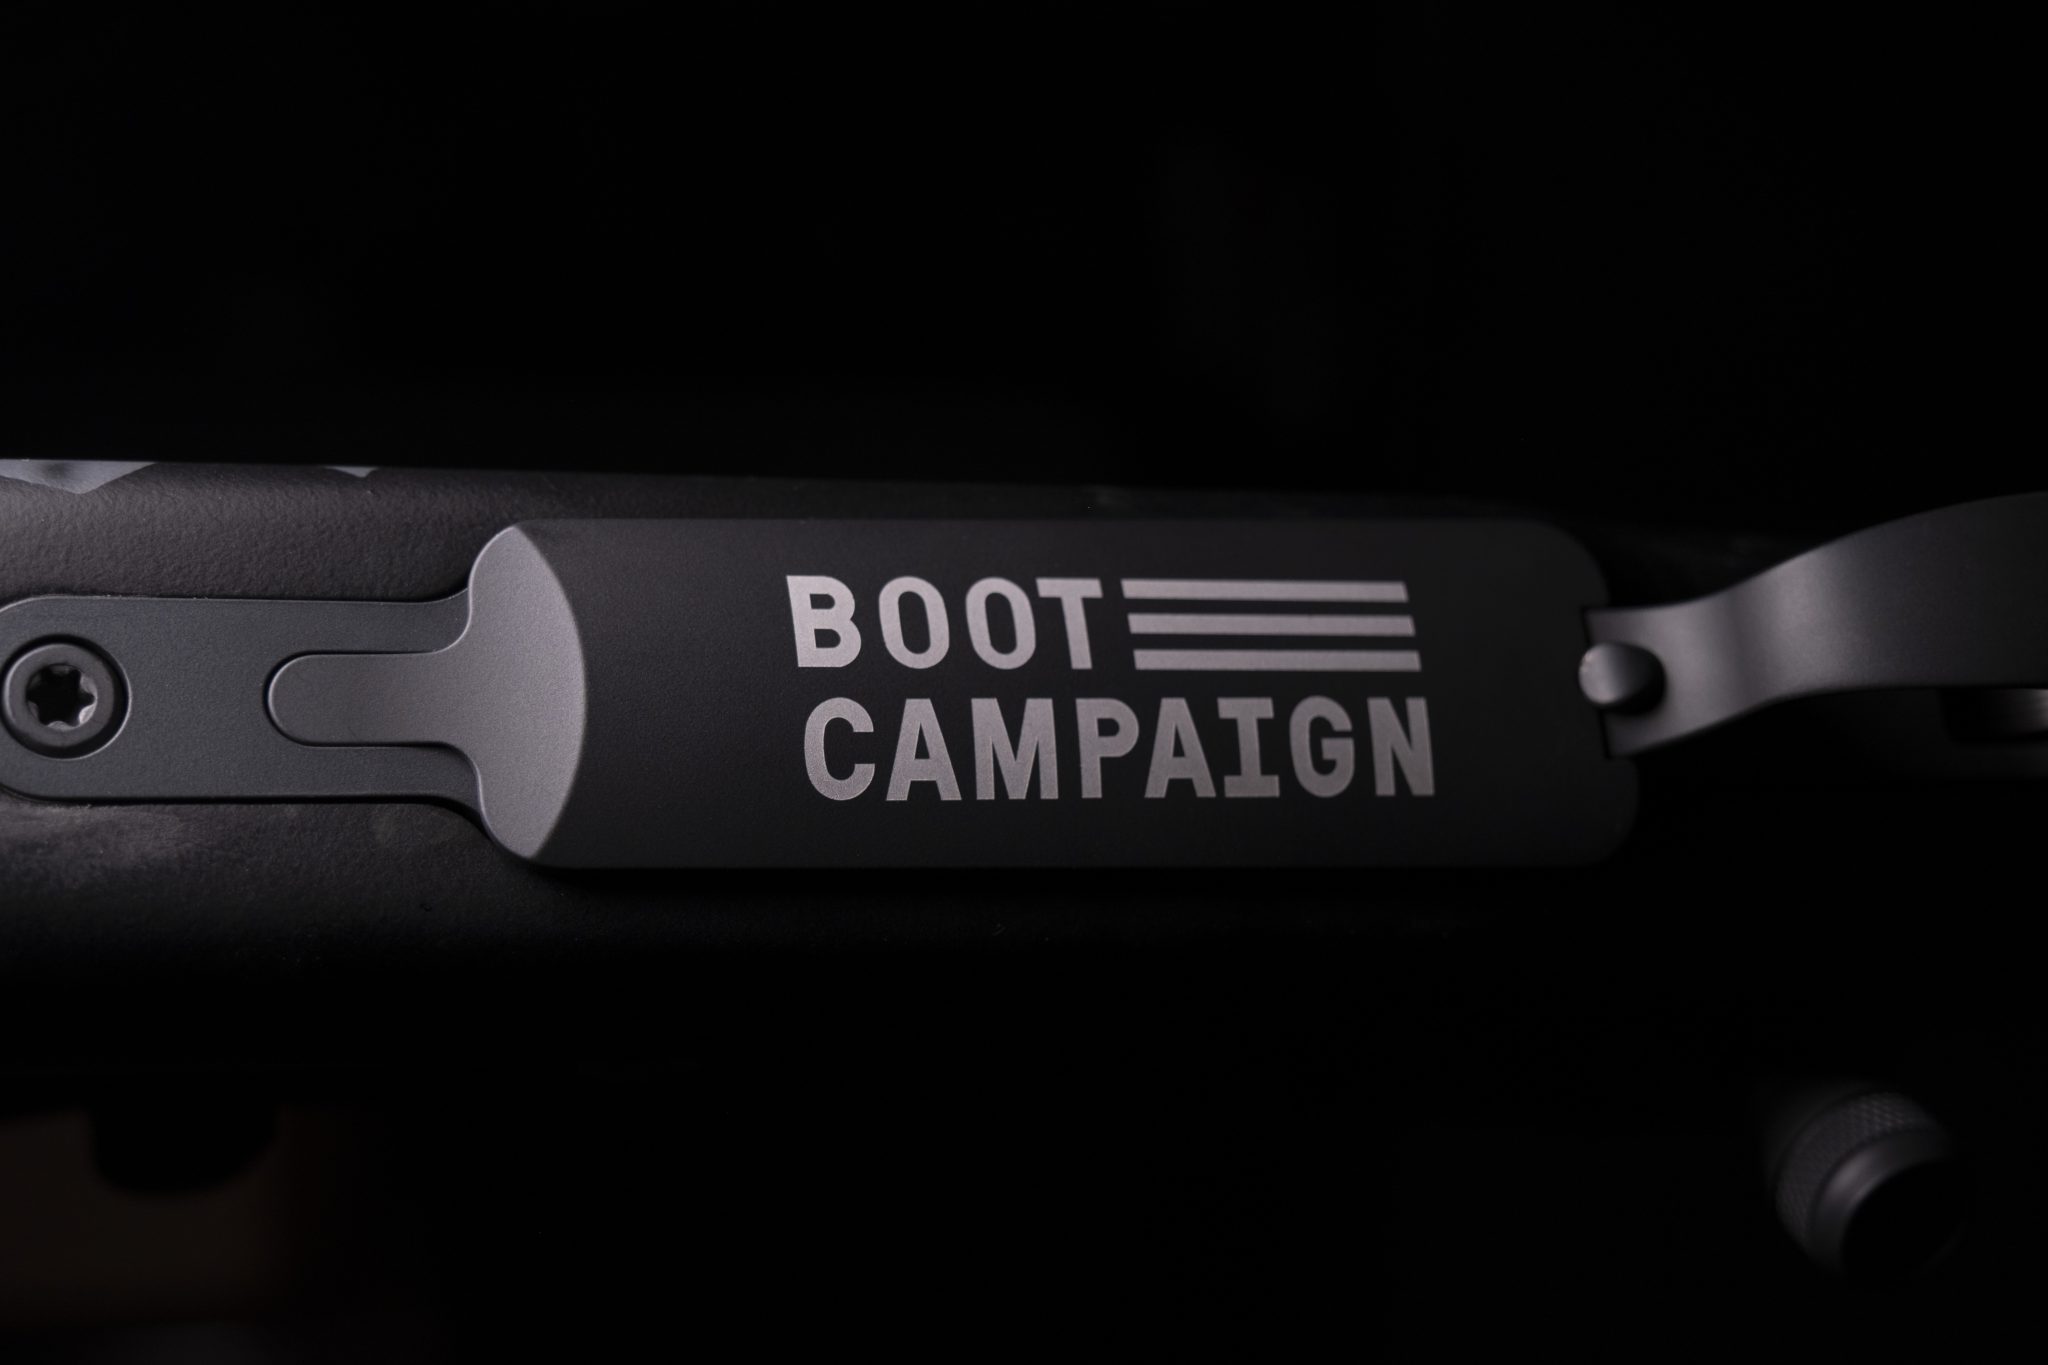 nosler rifles boot campaign